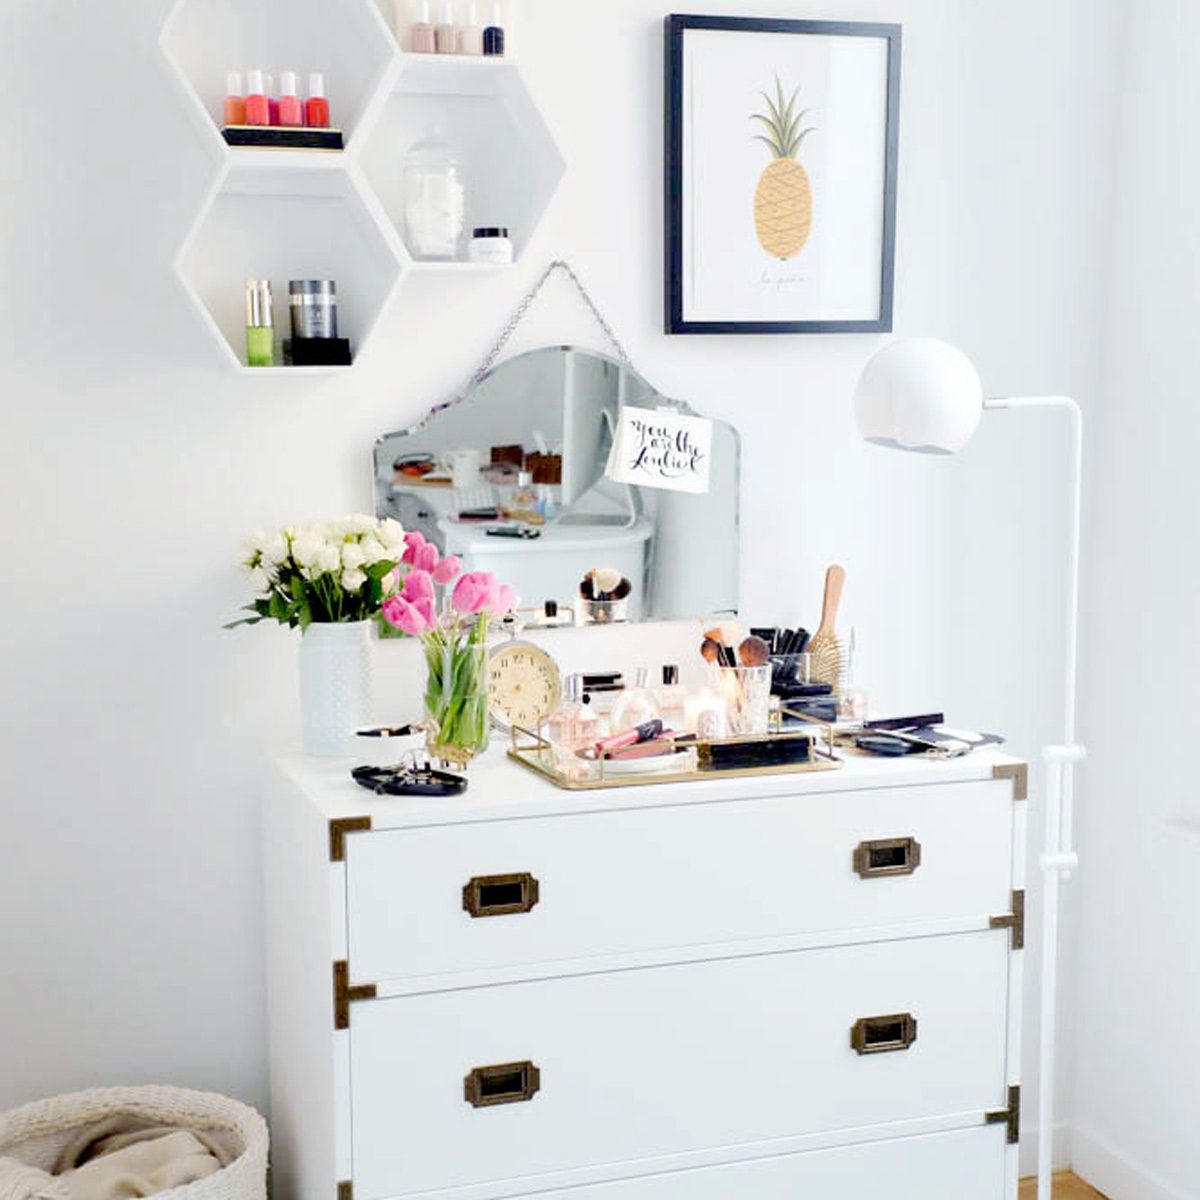 10 Awesome Ideas For A Beauty Vanity The Family Handyman